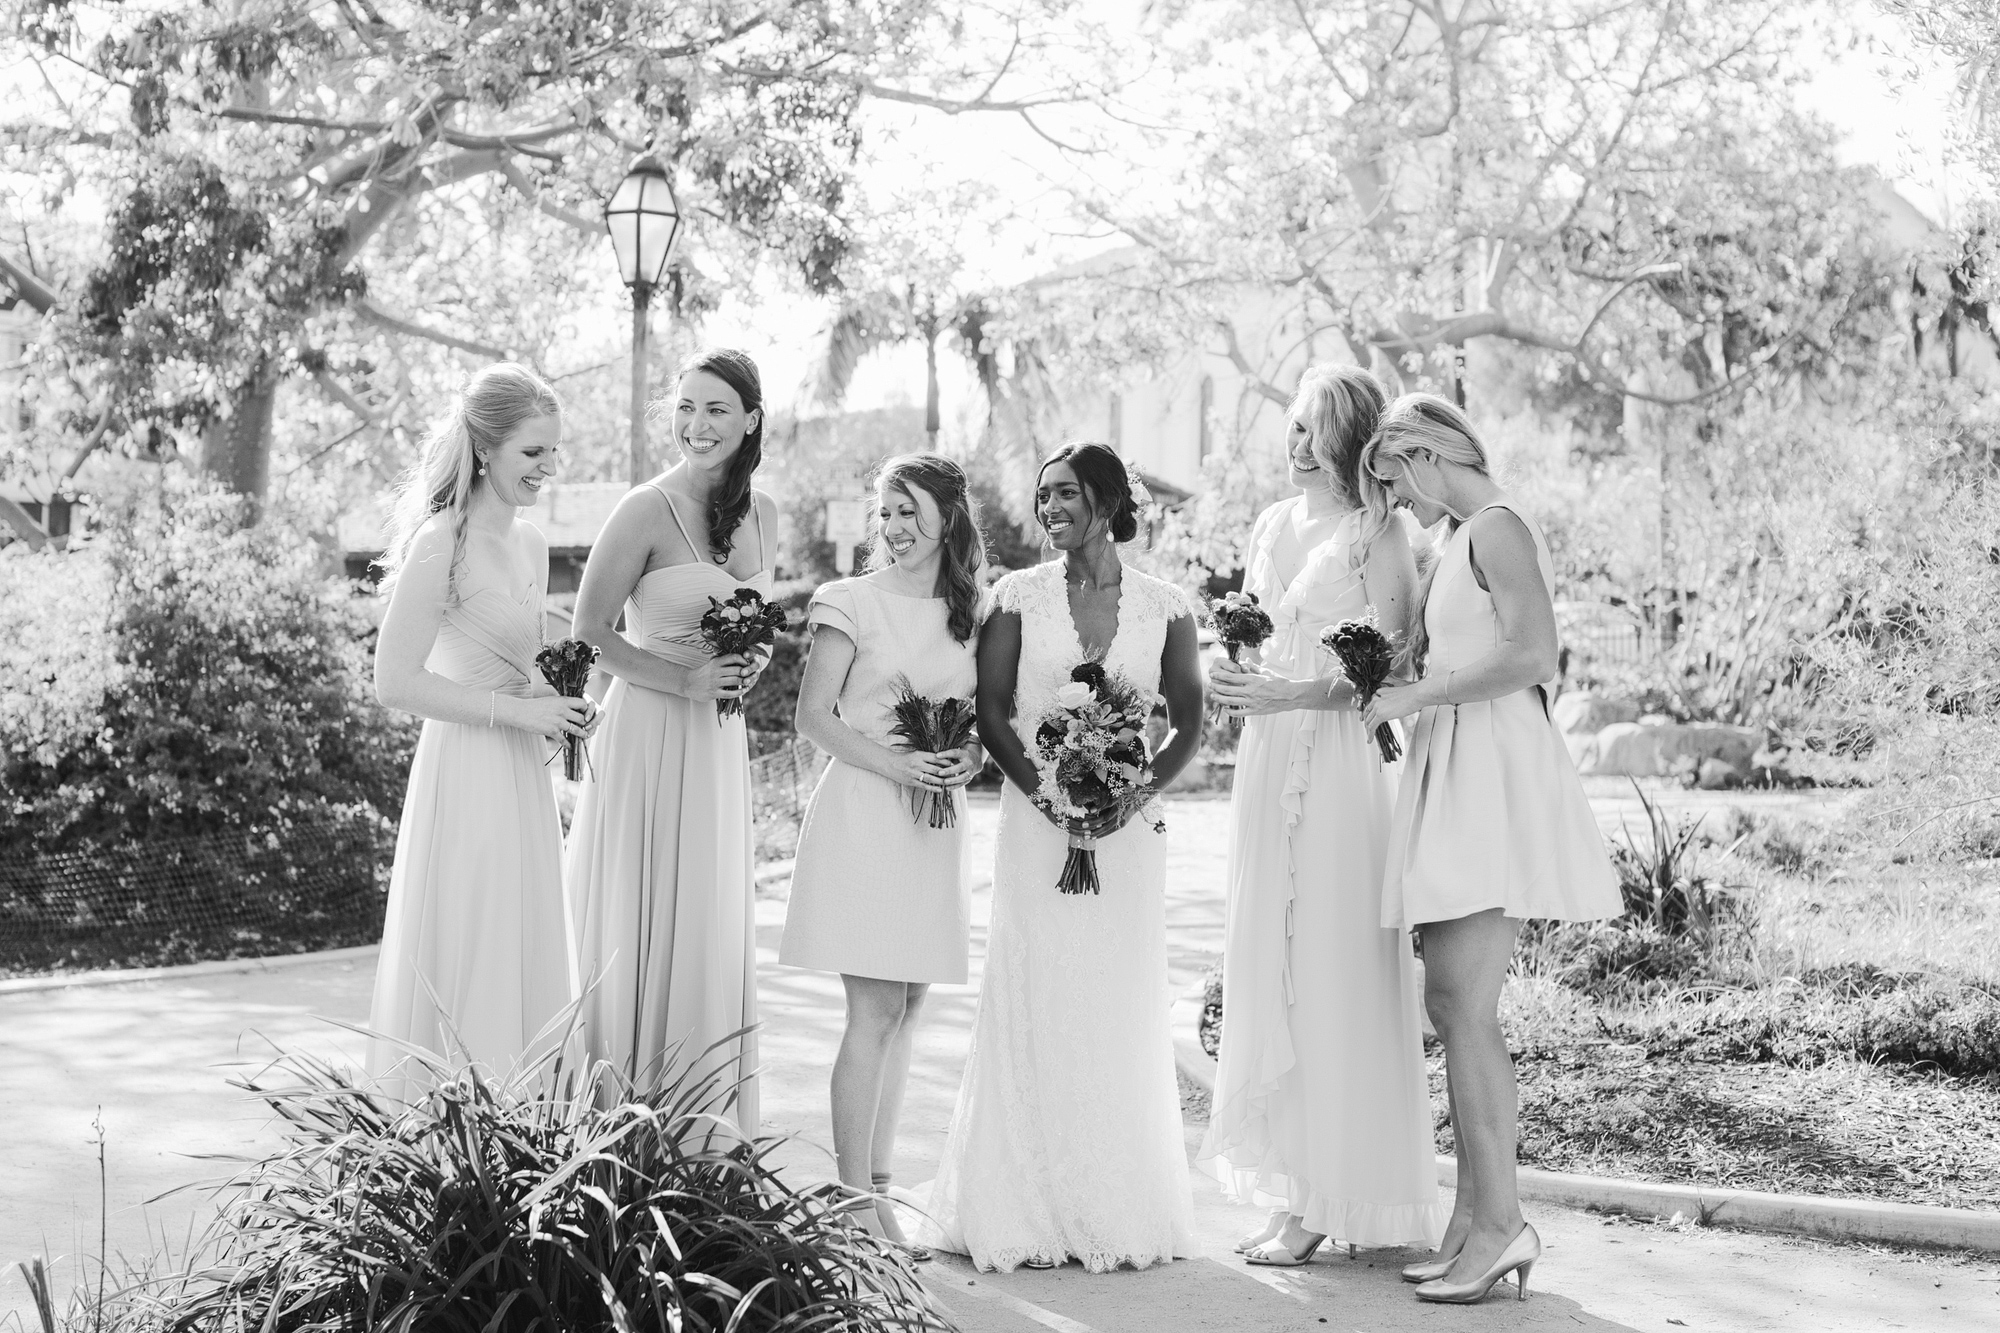 The bride and bridesmaids together. 